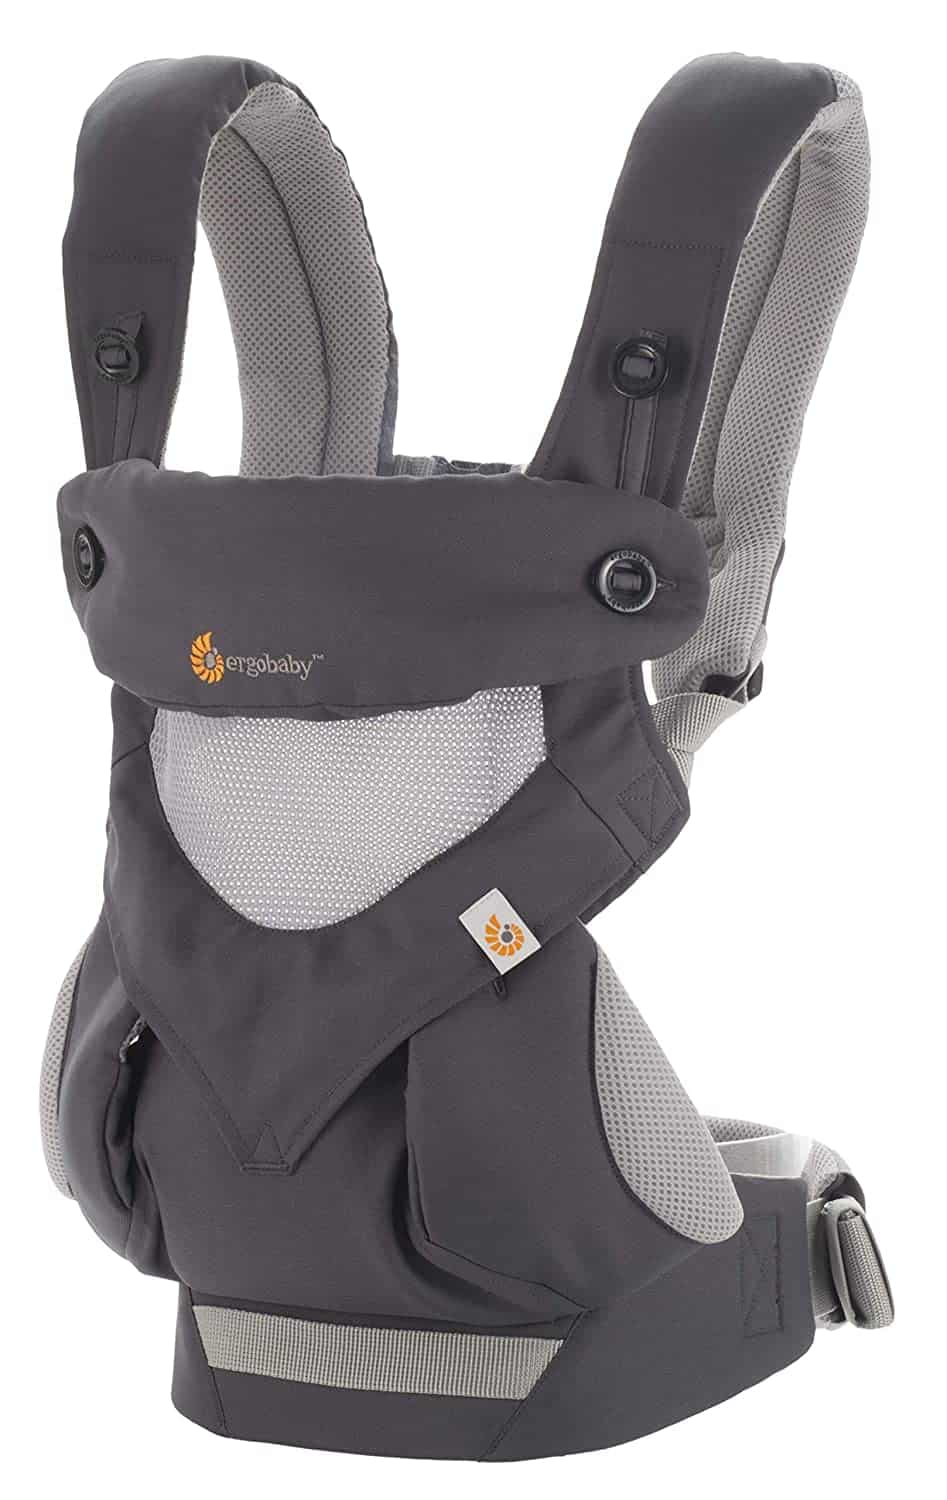 Amazon: Ergobaby 360 All-Position Baby Carrier ONLY $87.91 (Reg $97.91)